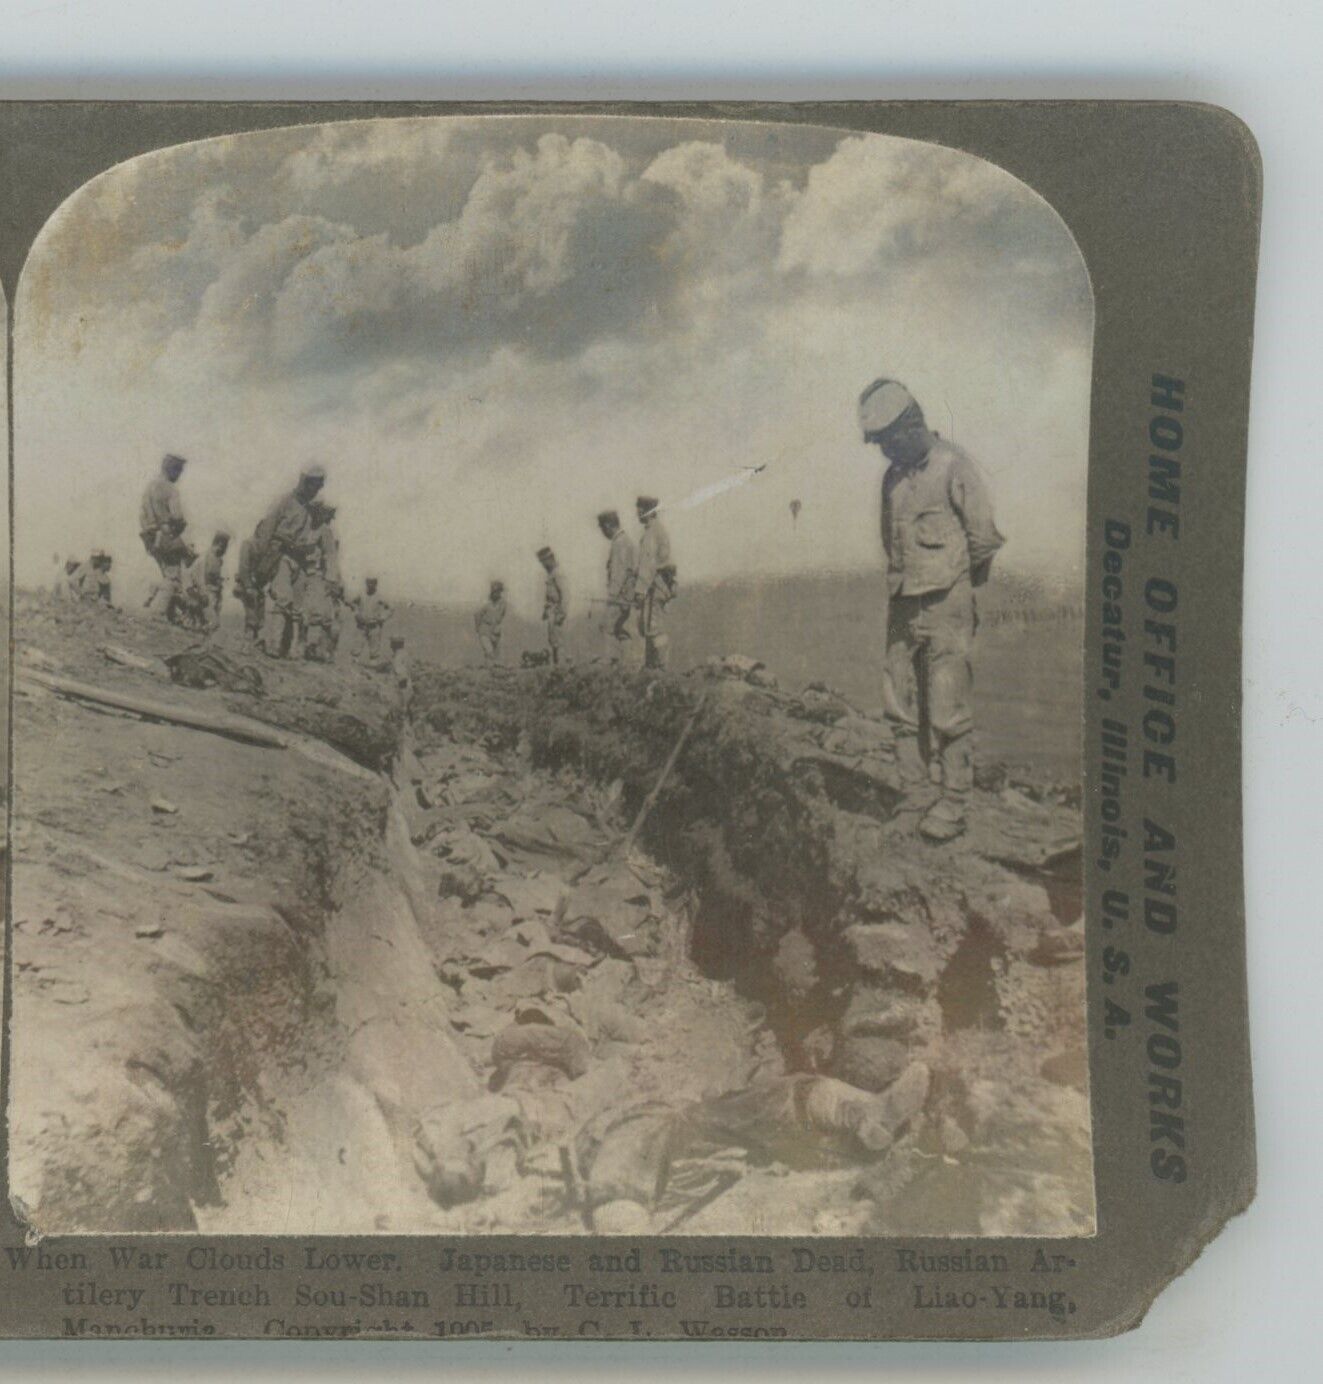 Japanese & Russian Dead Artillery Trench Soushan Hill Manchuria China Stereoview